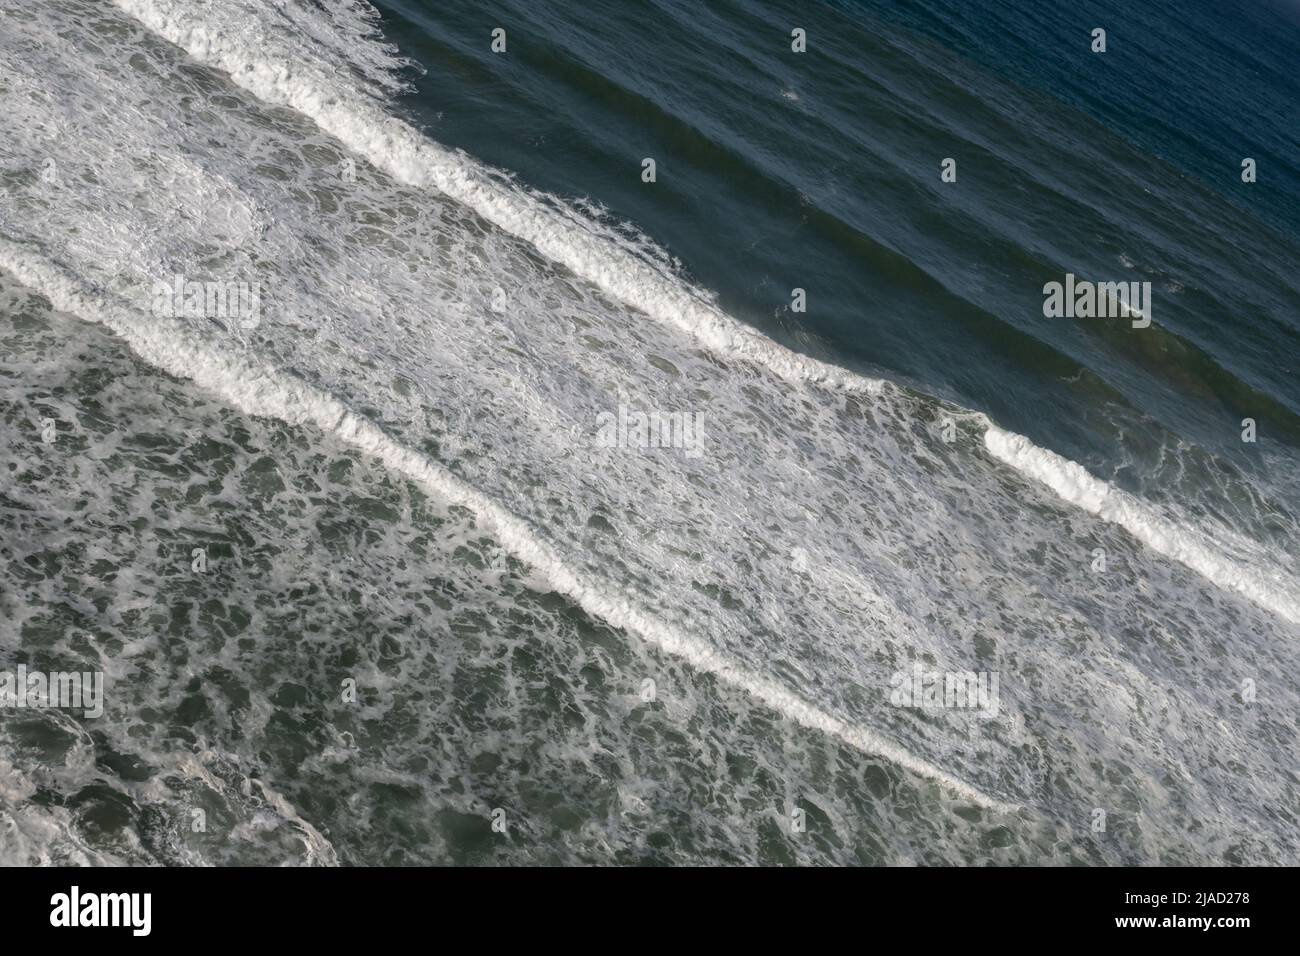 Rolling waves breaking near the Atlantic coast of Portugal in a regular diagonal pattern with white foam forming Stock Photo